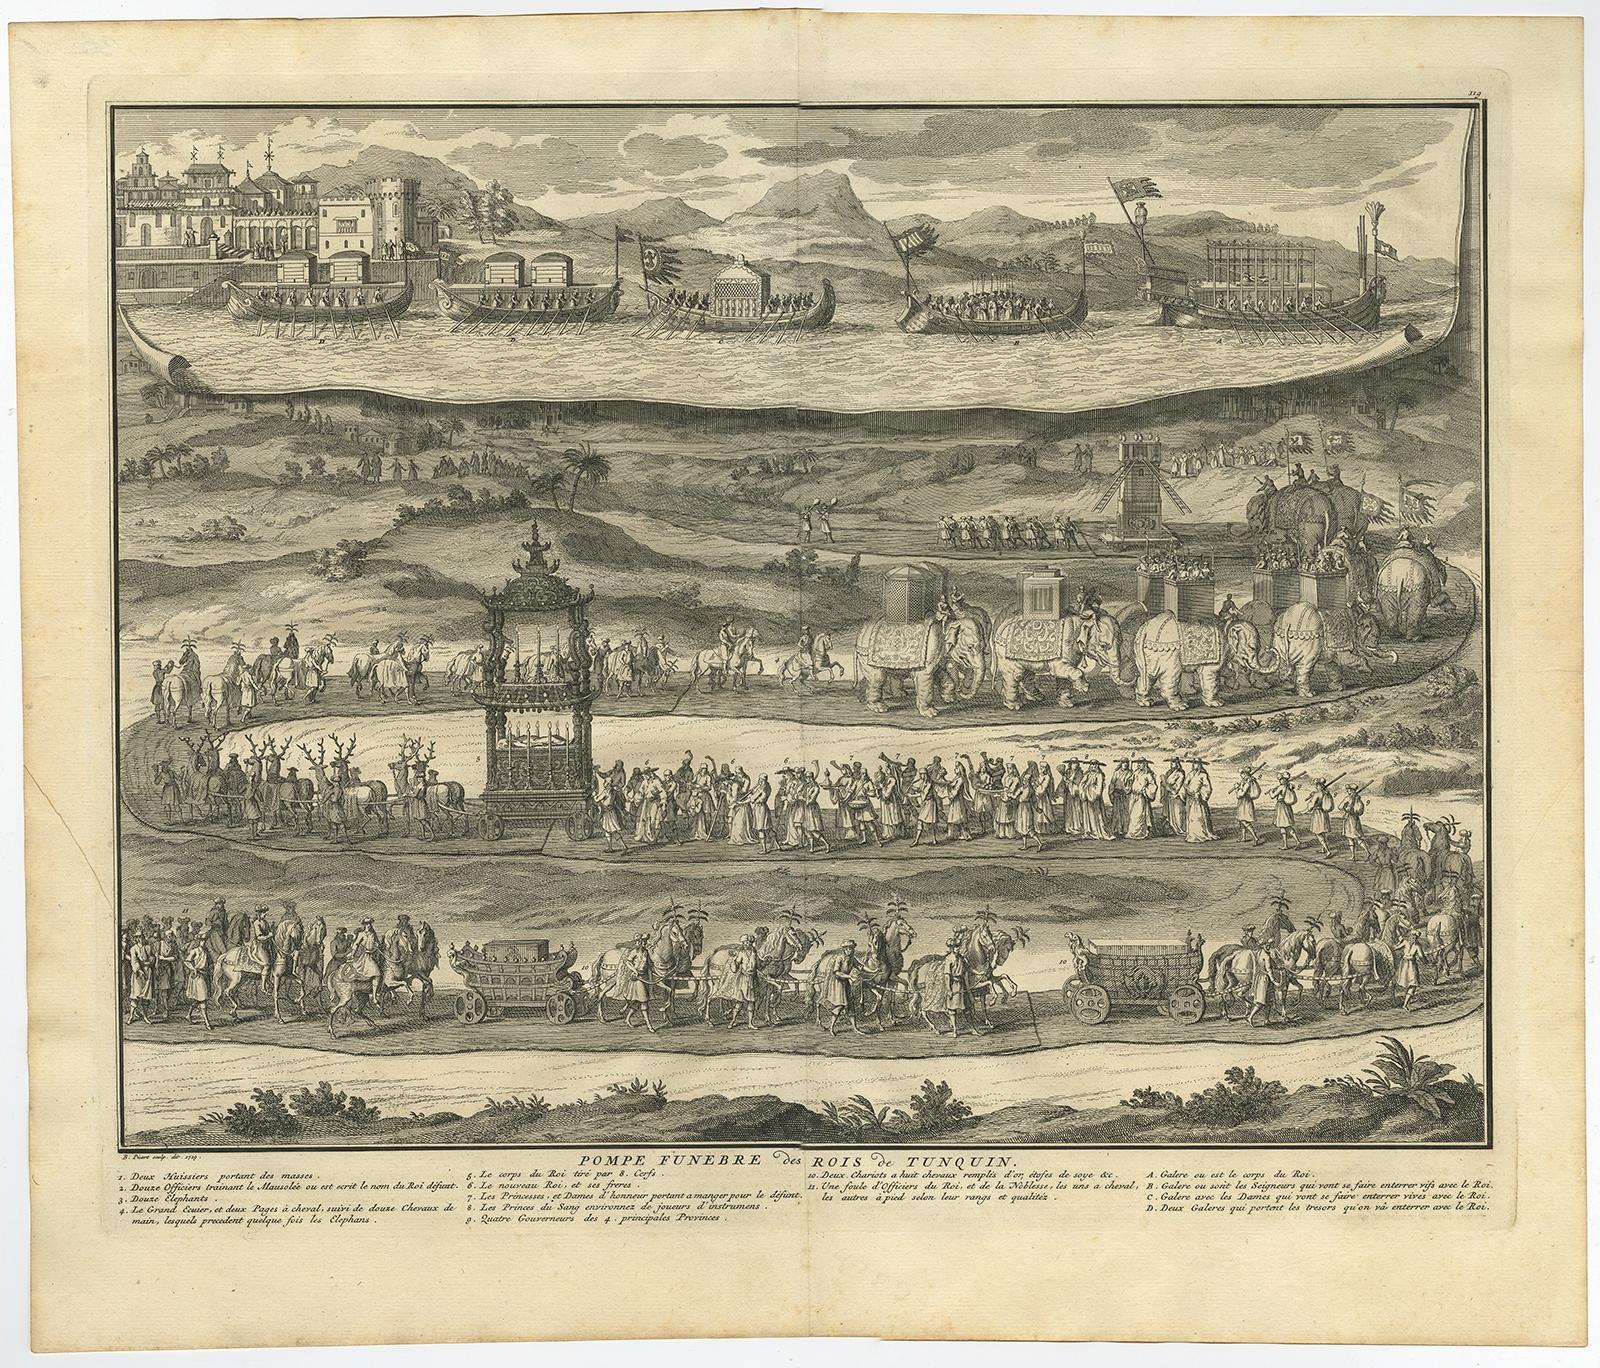 Description: Antique print, titled: 'Pompe Funebre des Rois de Tunquin' - This plate shows a funeral procession of the Kings of Vietnam (formerTunquin or Tonkin). With ships, horses, elephants, deer etc.

Source unknown, to be determined.

Artists